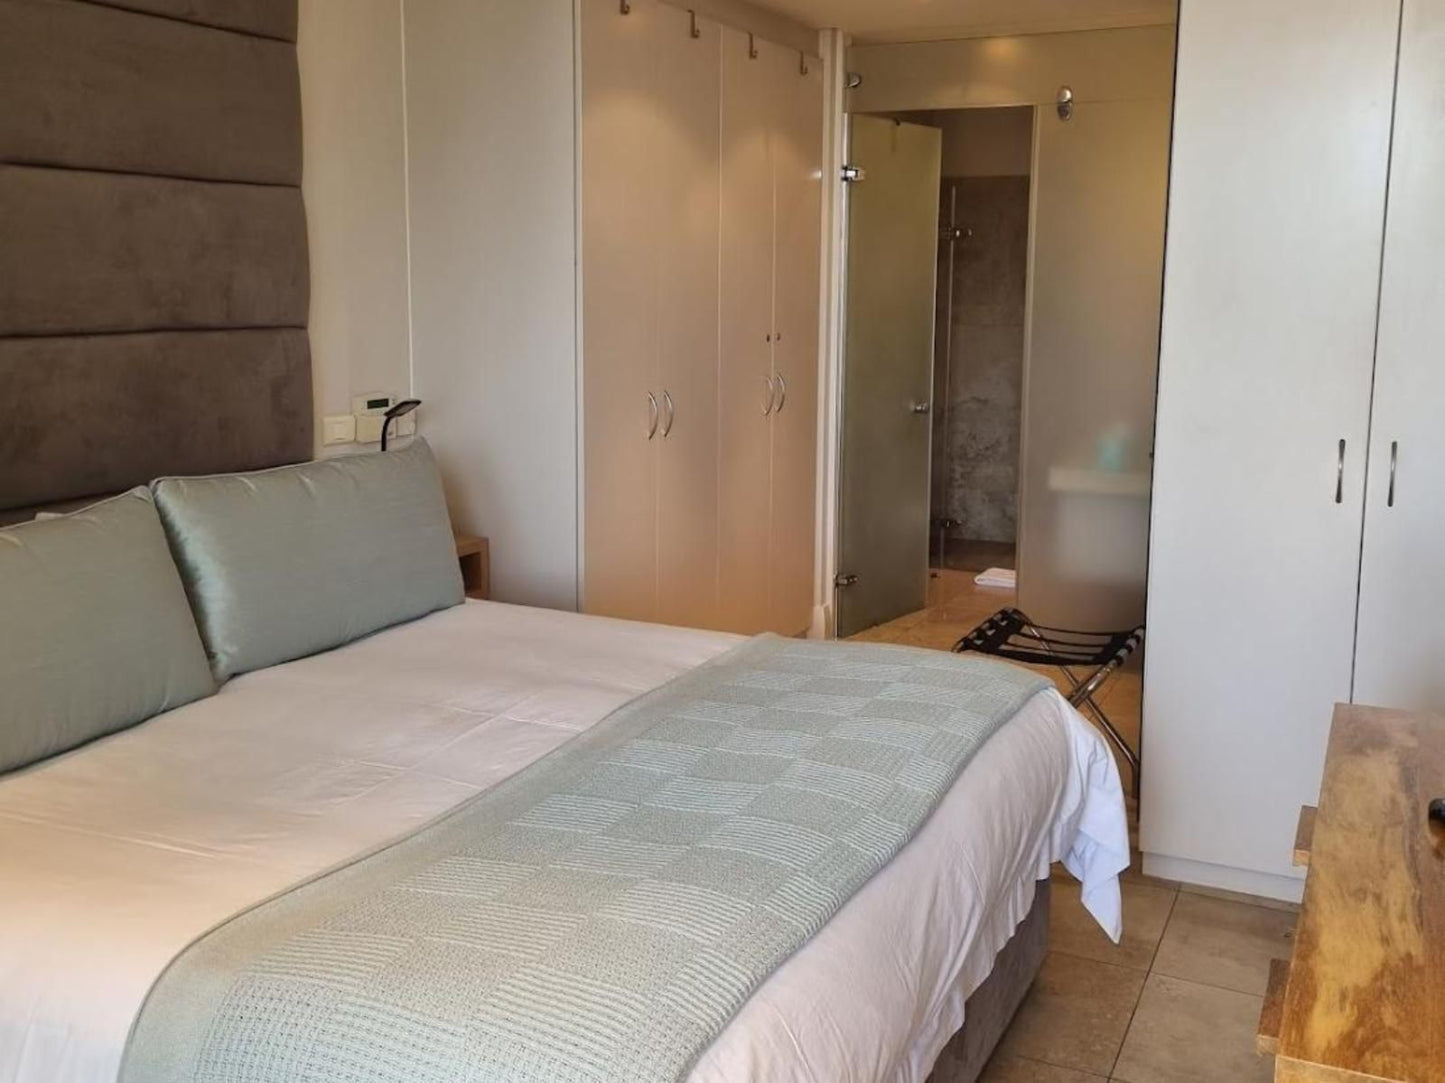 202 Kylemore A Marina Residential De Waterkant Cape Town Western Cape South Africa Bedroom